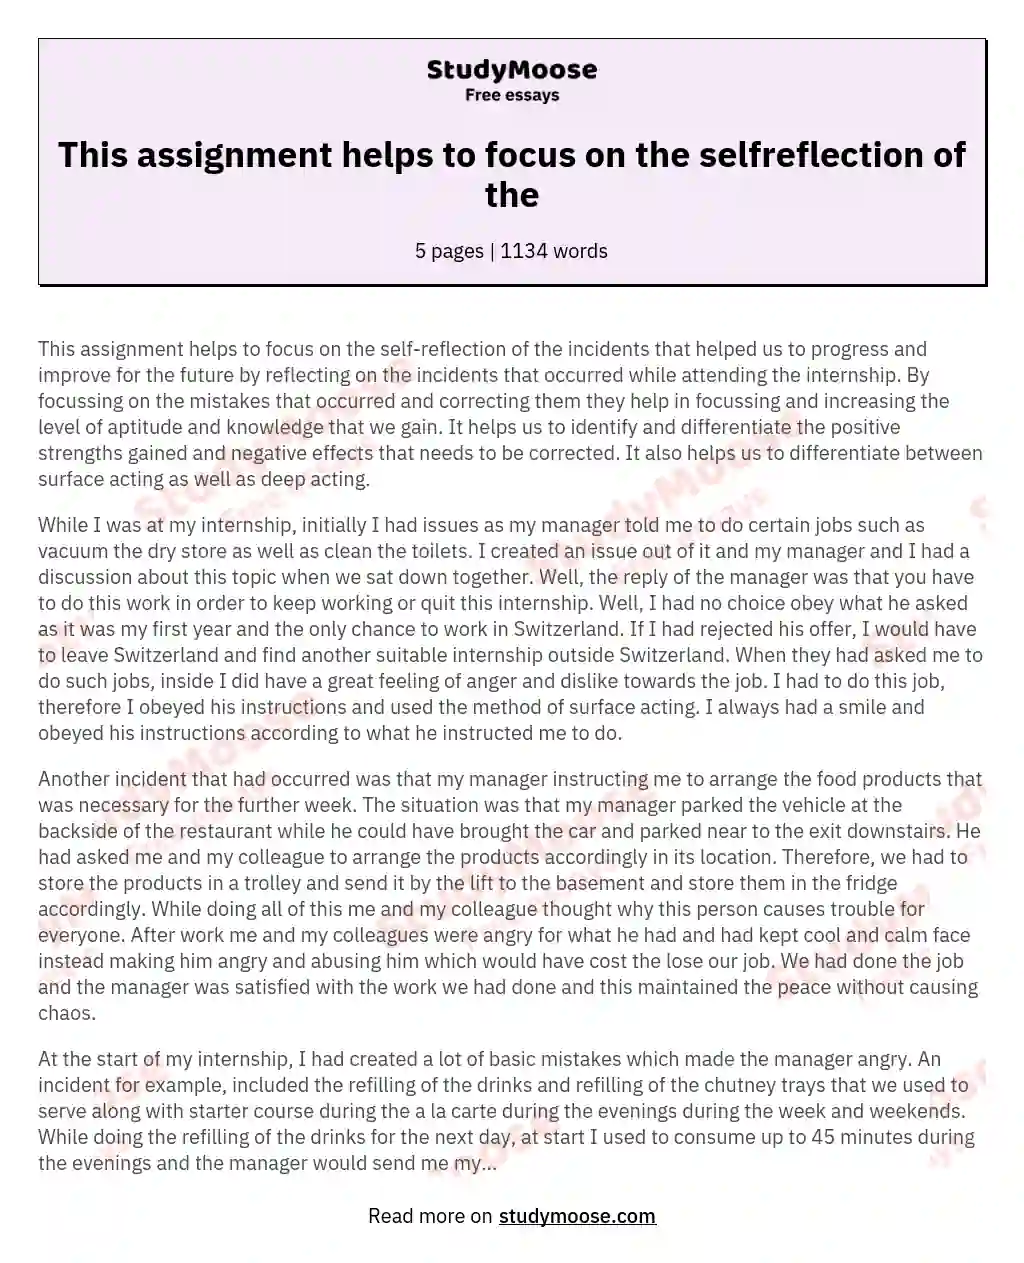 This assignment helps to focus on the selfreflection of the essay